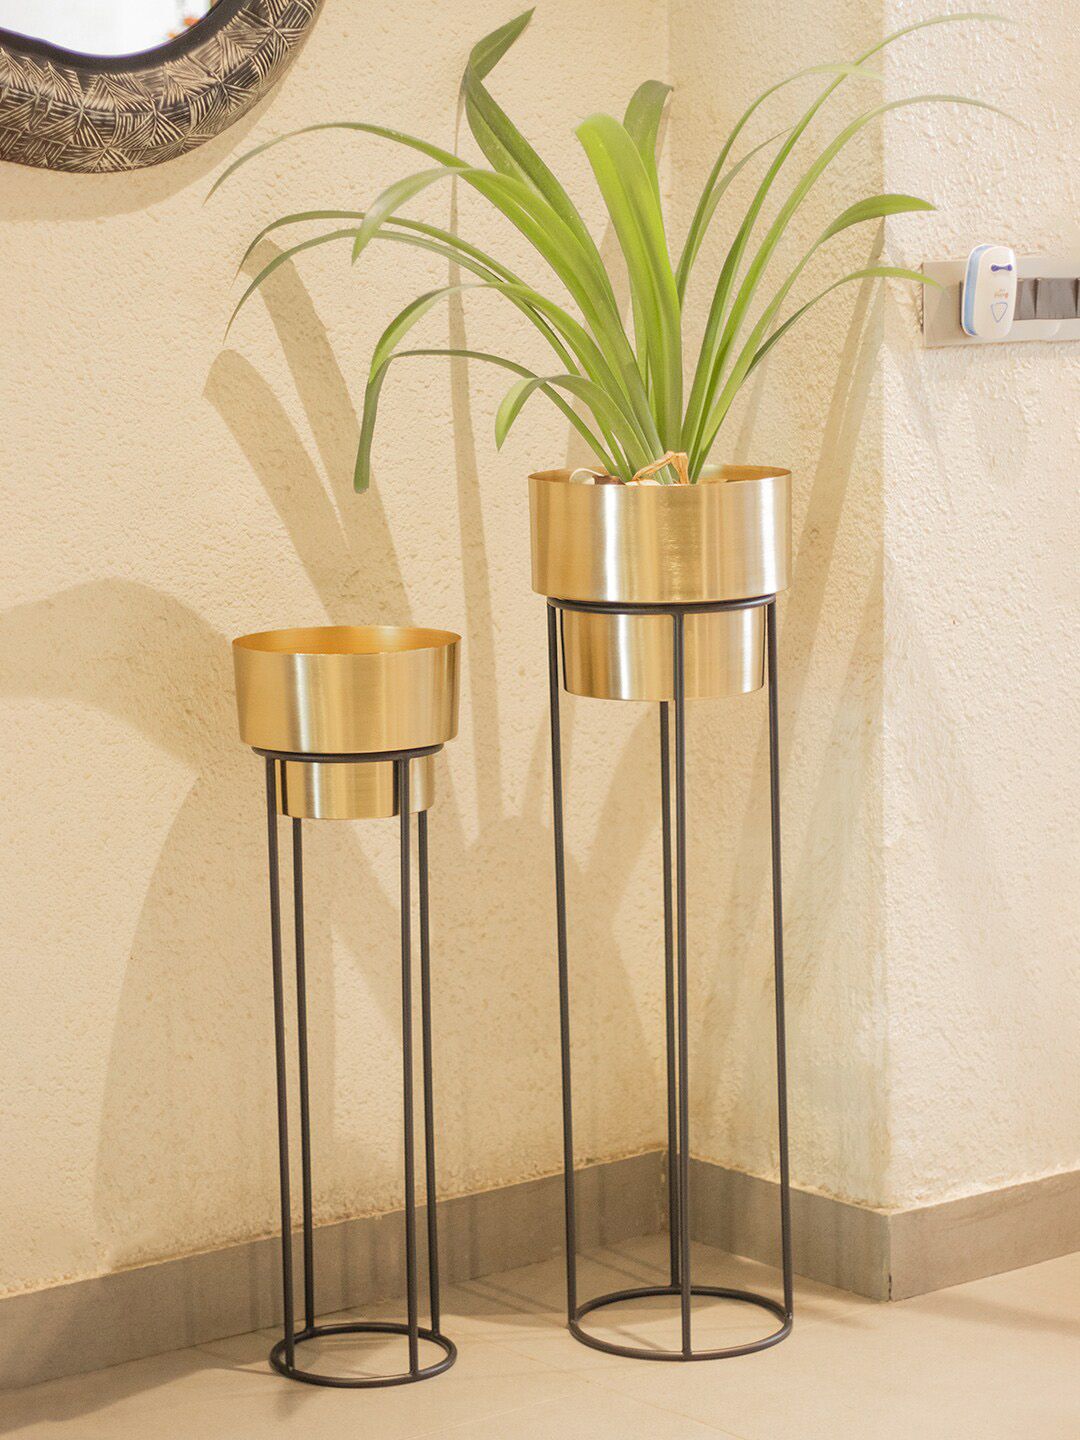 MARKET99 Set Of 2 Solid Planters Price in India